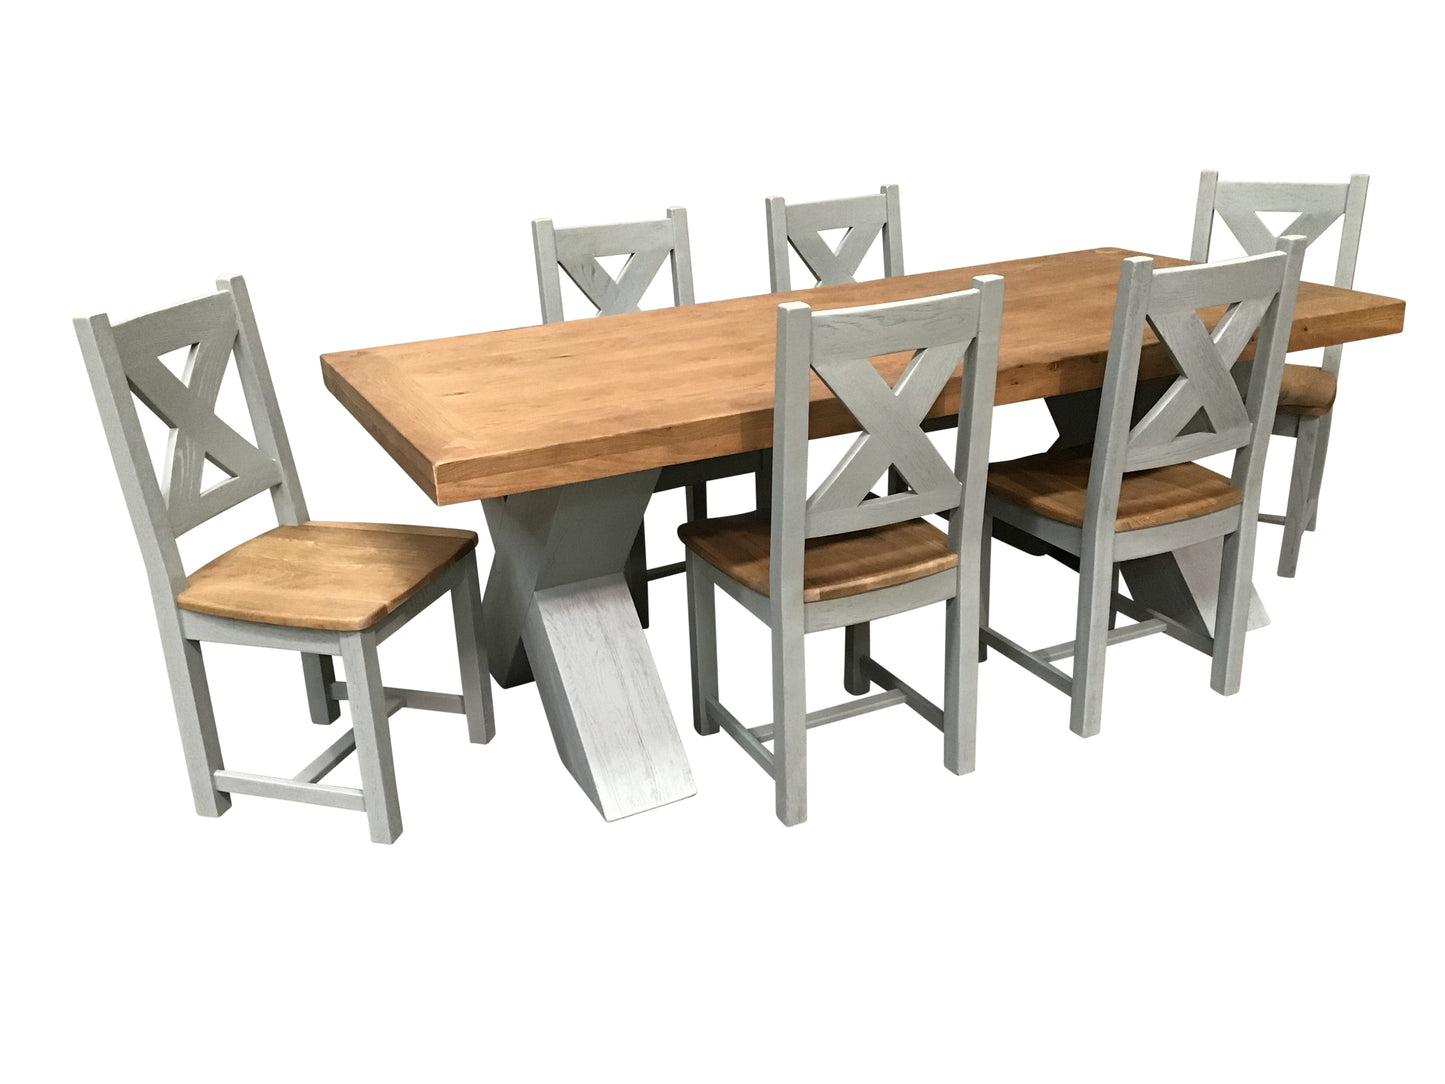 Maximus Oak 1.9m Dining Set painted French Grey with Maximus Dining Chairs